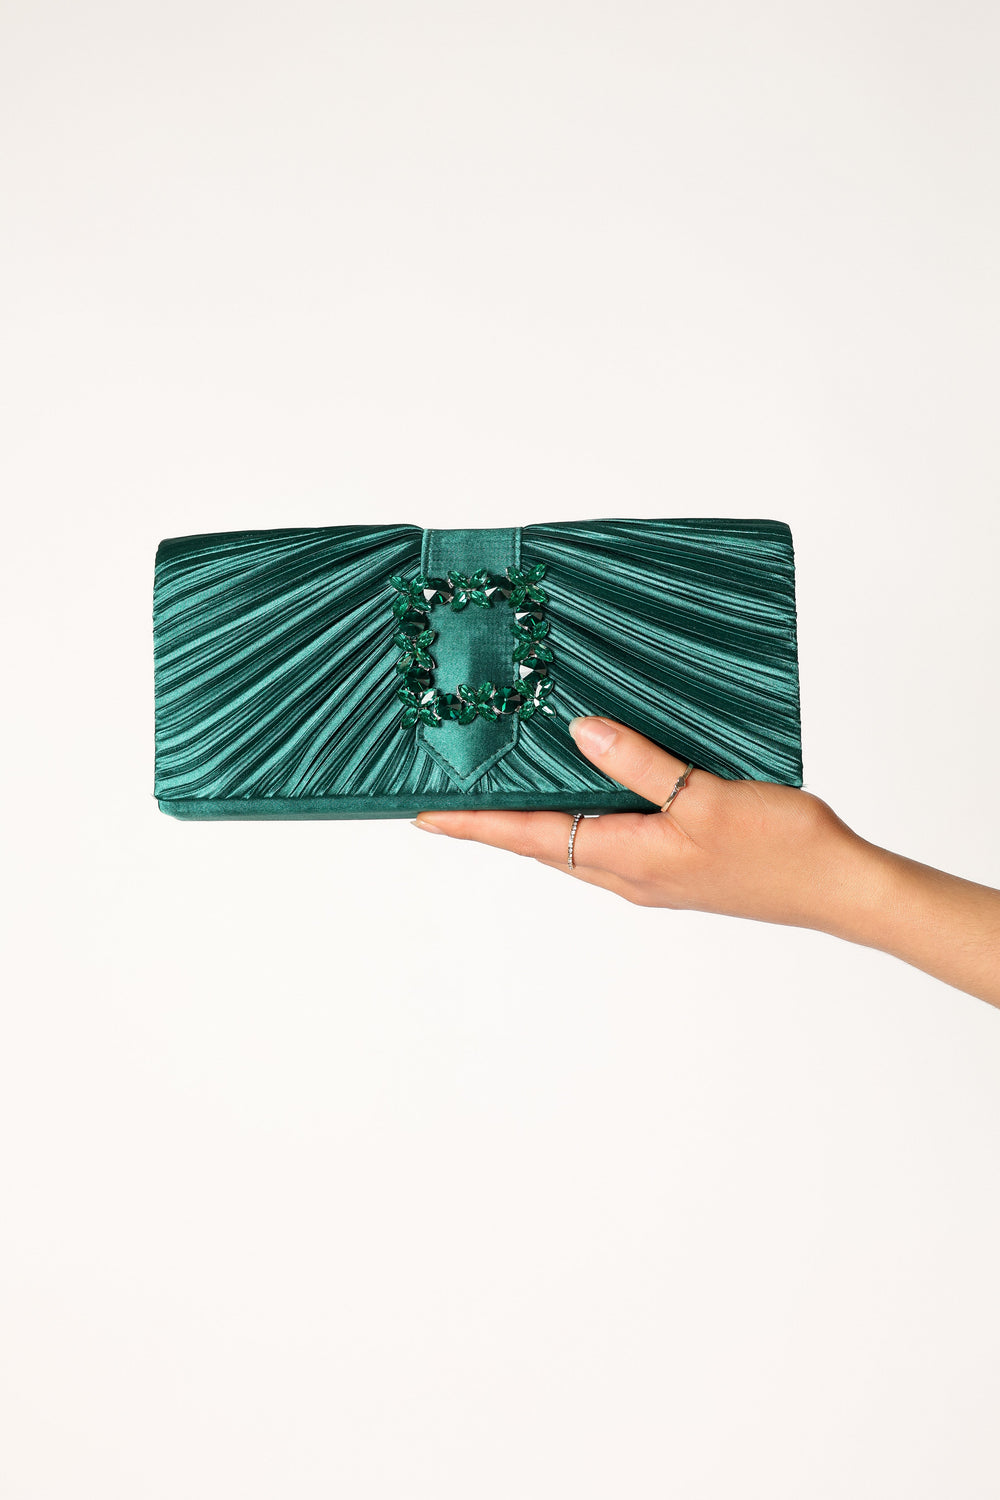 Petal and Pup USA ACCESSORIES Judah Pleated Clutch - Emerald One Size